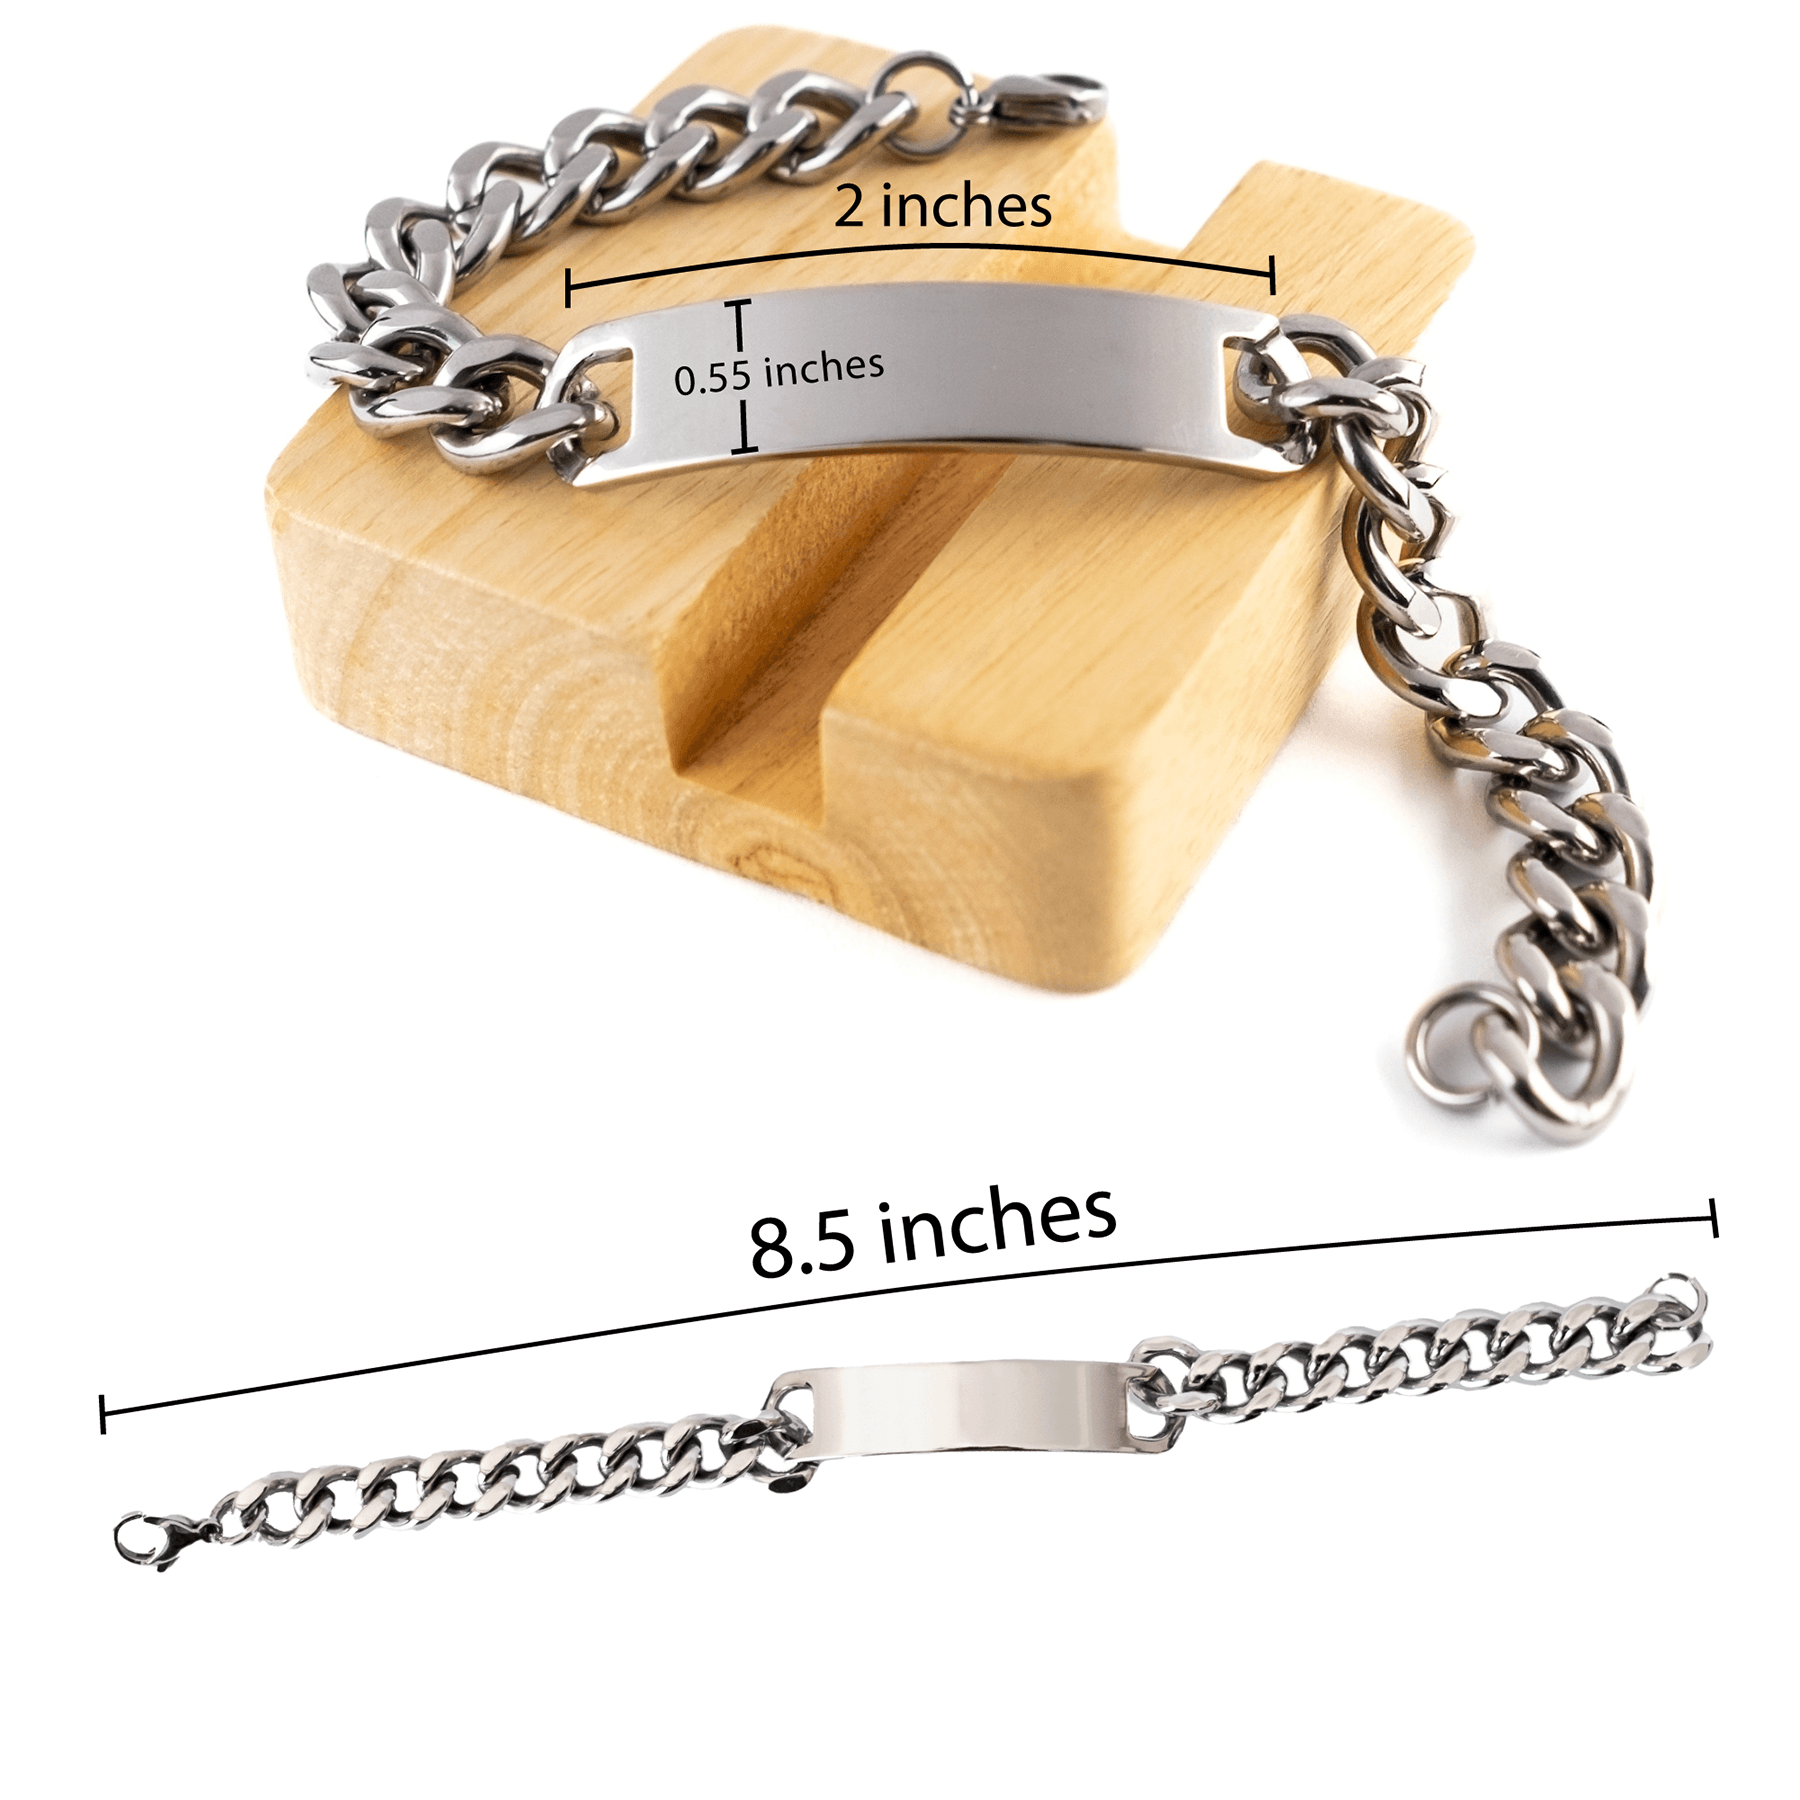 Remarkable Judge Gifts, Your dedication and hard work, Inspirational Birthday Christmas Unique Cuban Chain Stainless Steel Bracelet For Judge, Coworkers, Men, Women, Friends - Mallard Moon Gift Shop